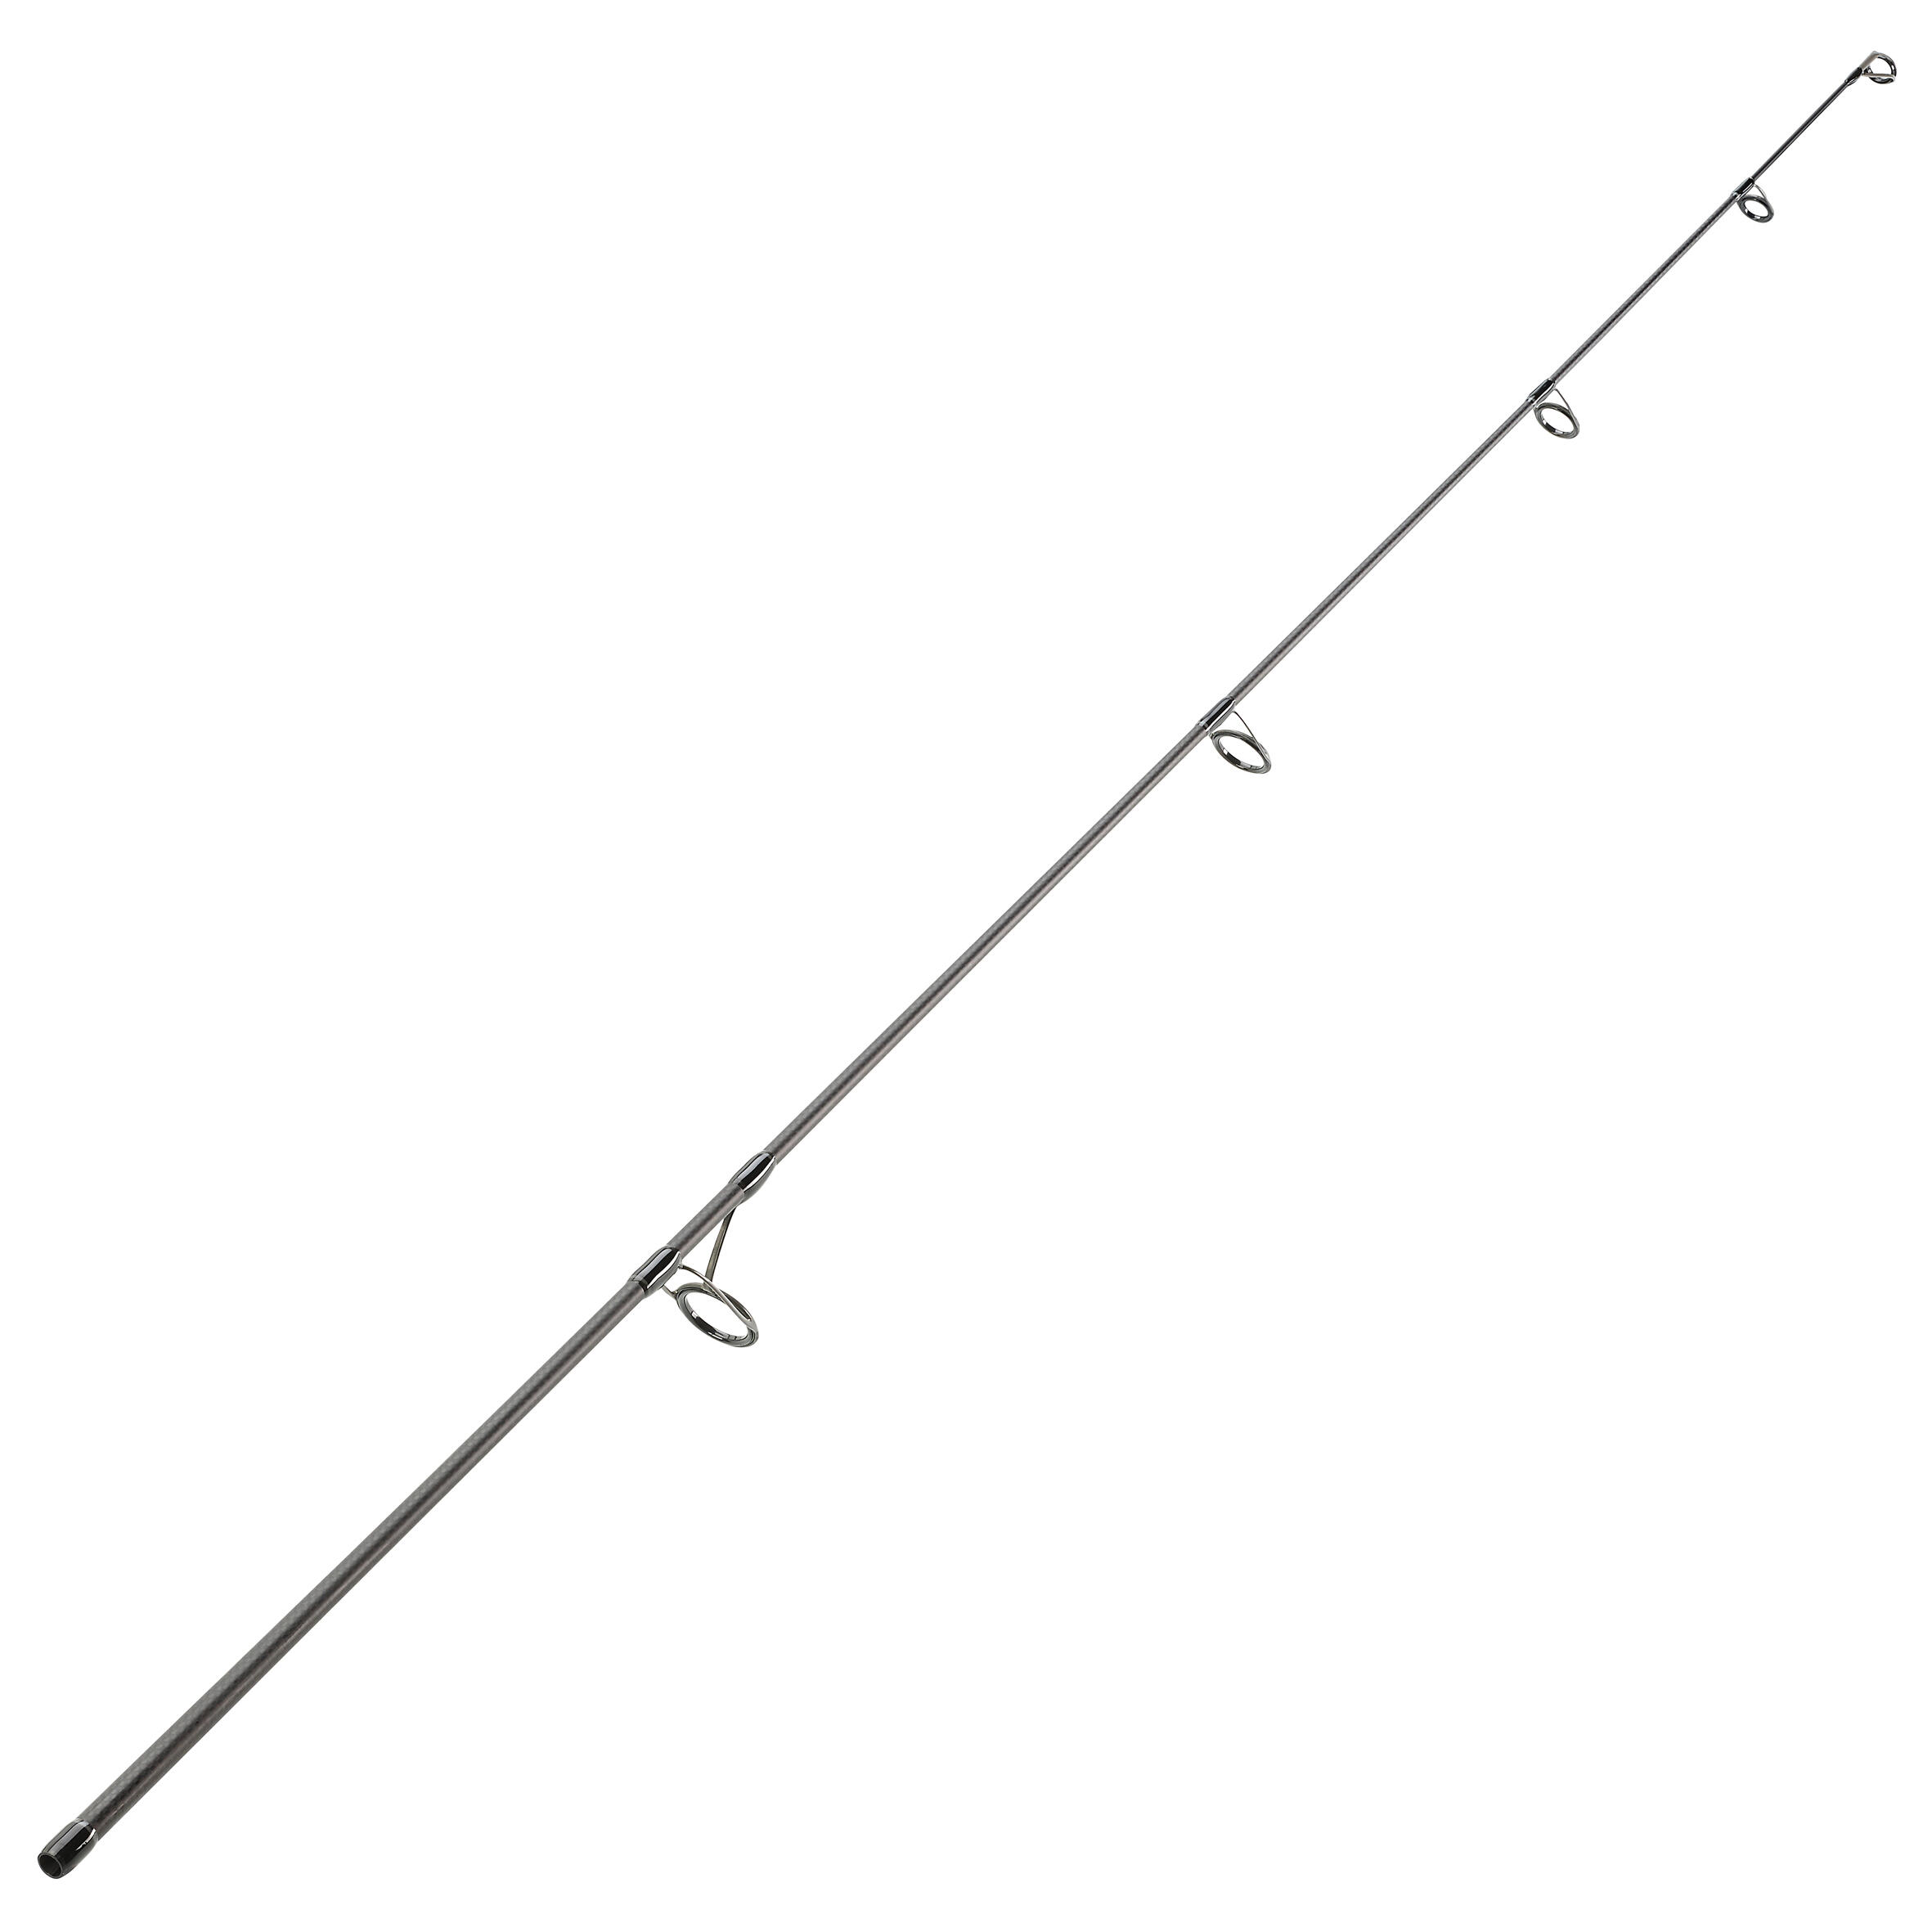 CAPERLAN CARP FISHING REPLACEMENT TIP FOR XTREM-9 COMPAKT 10' ROD